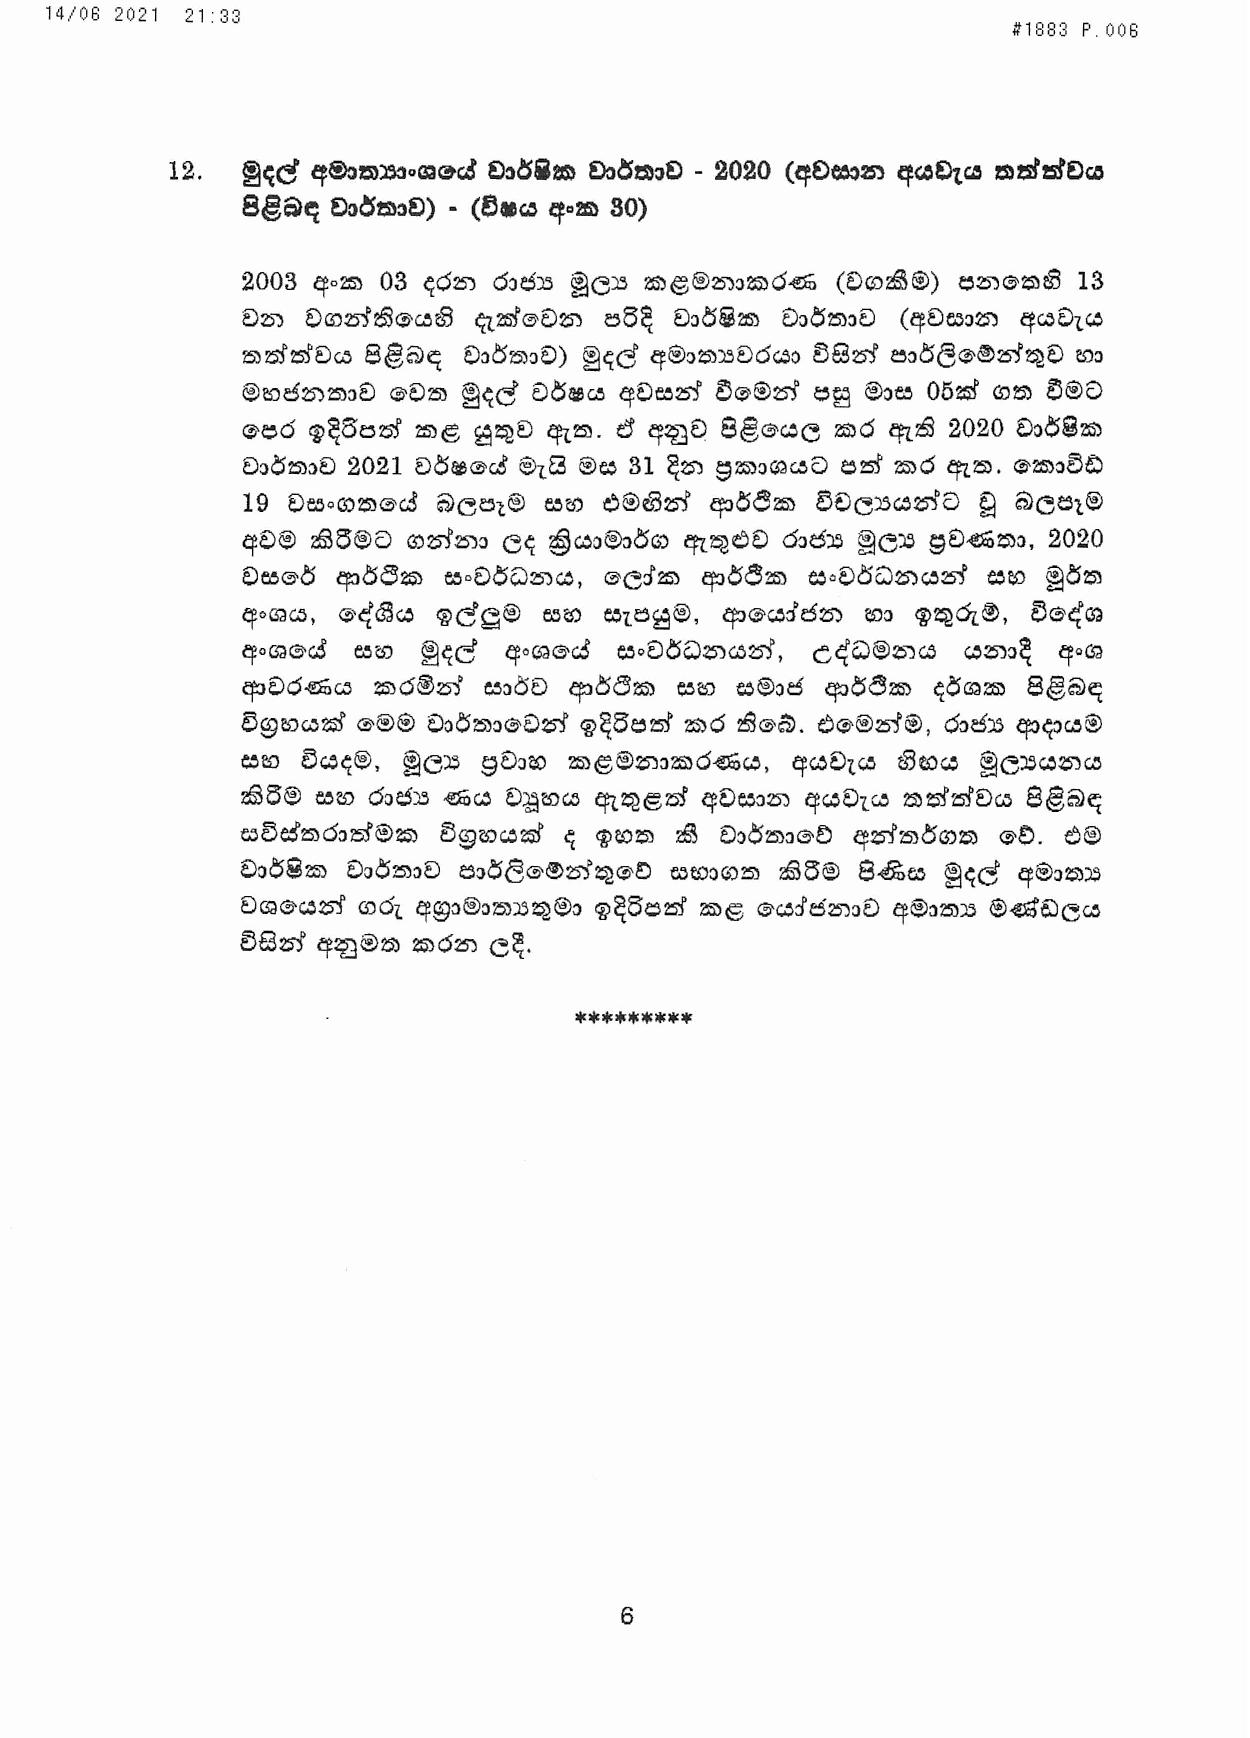 Cabinet Decisions on 14.06.2021 page 006